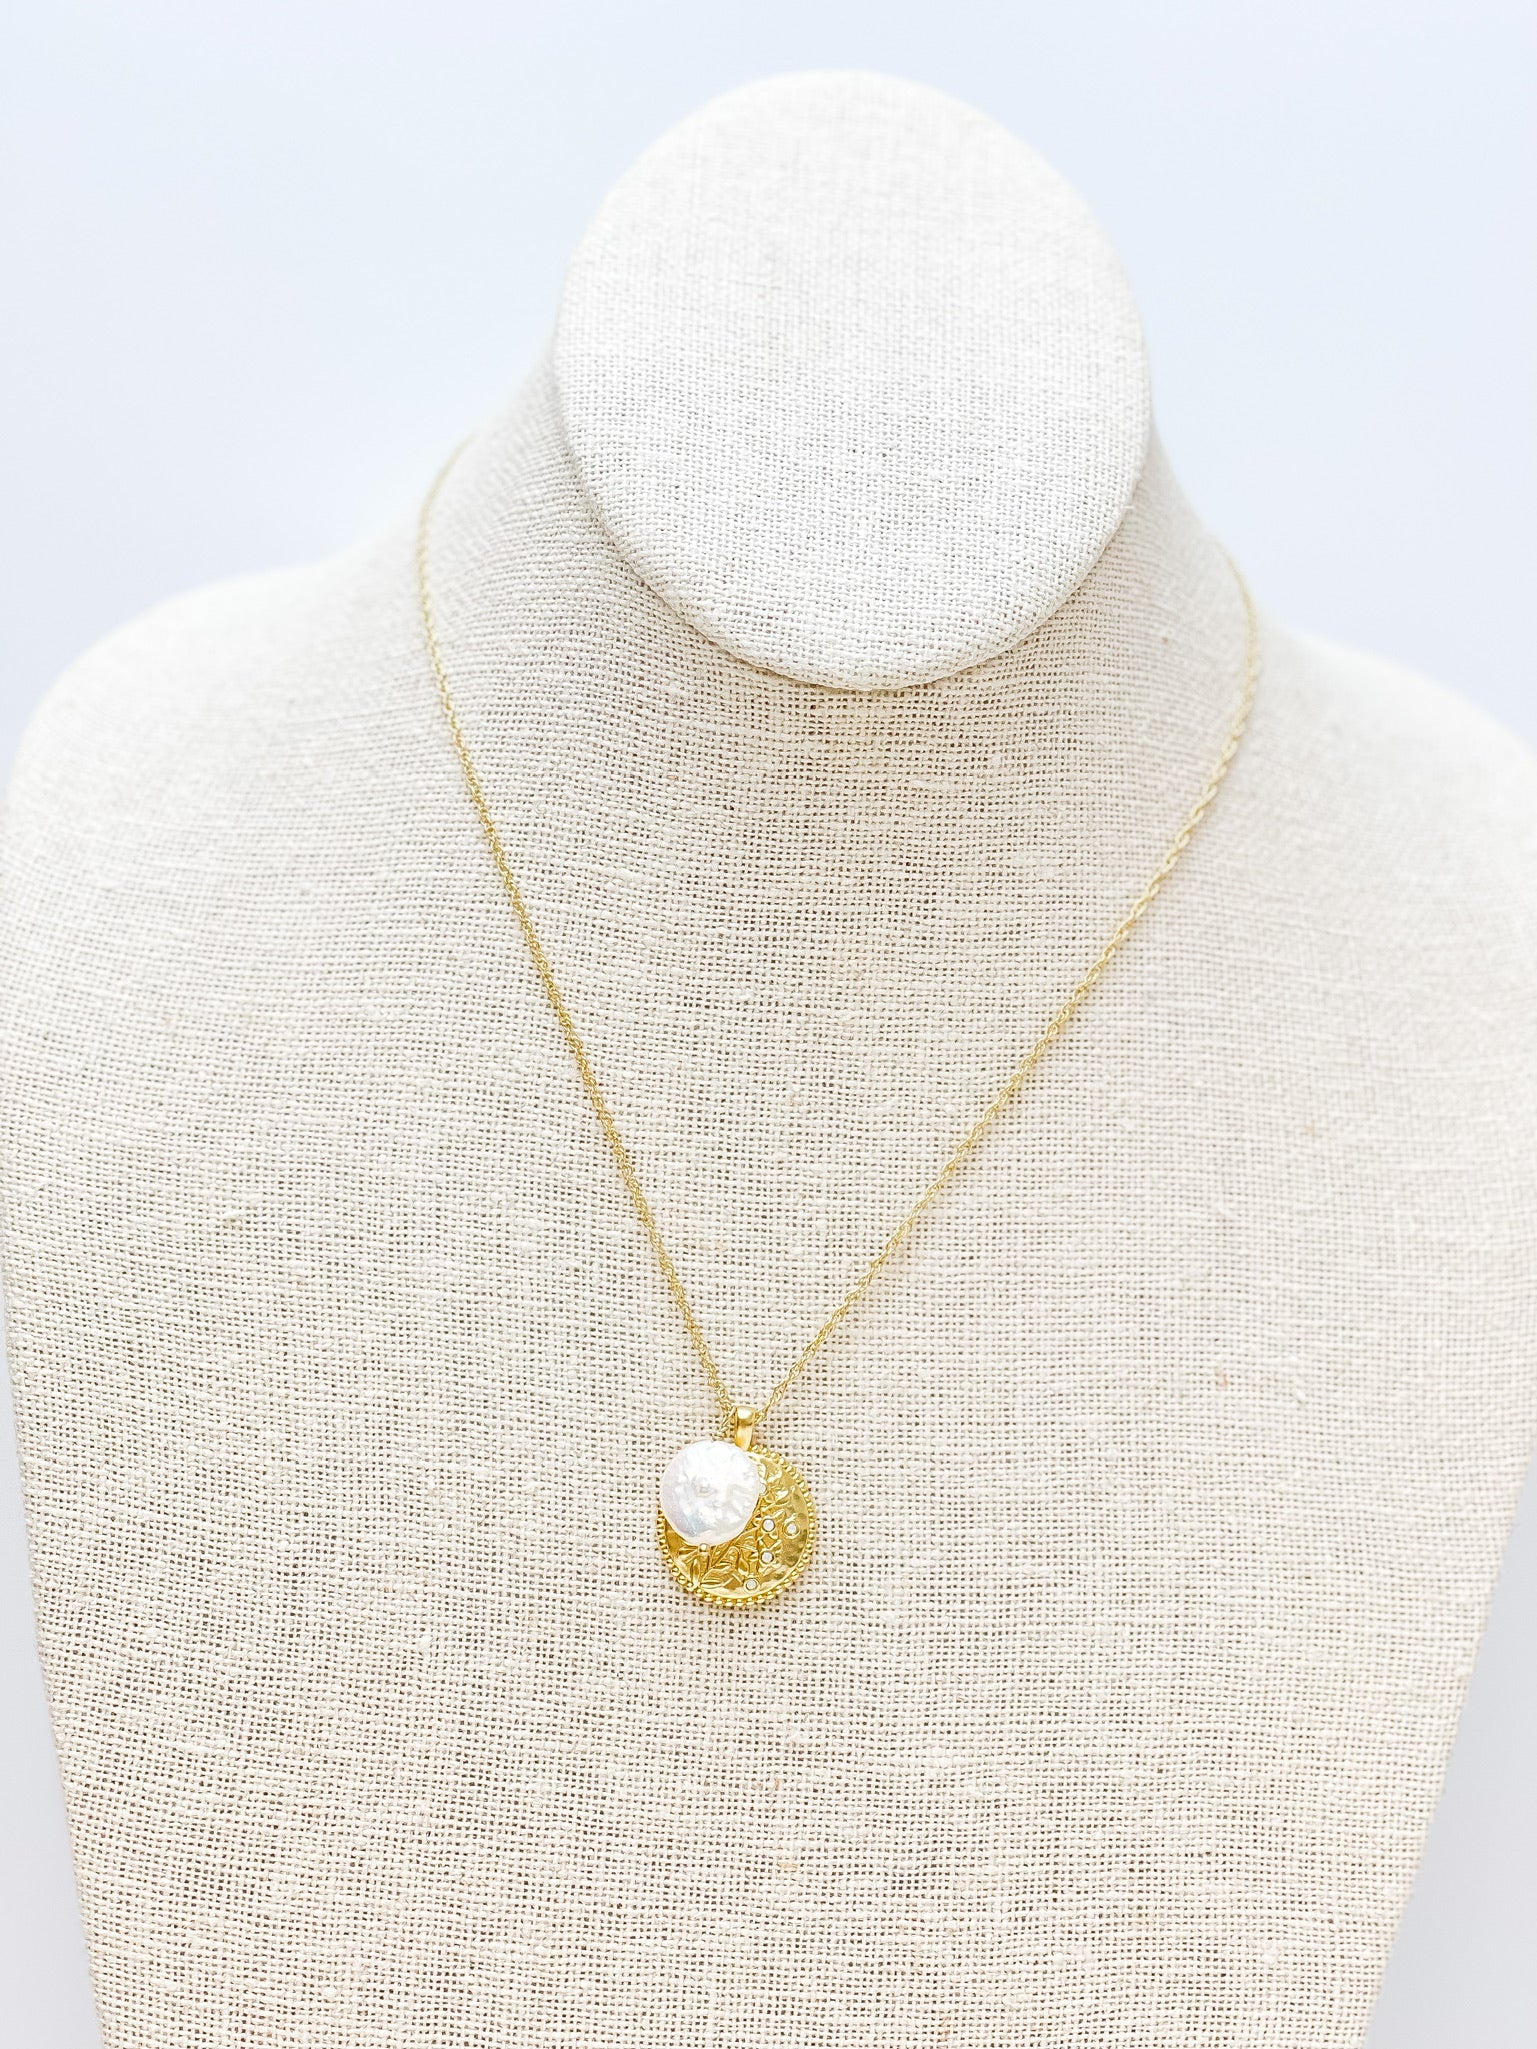 Floret Necklace by Spartina